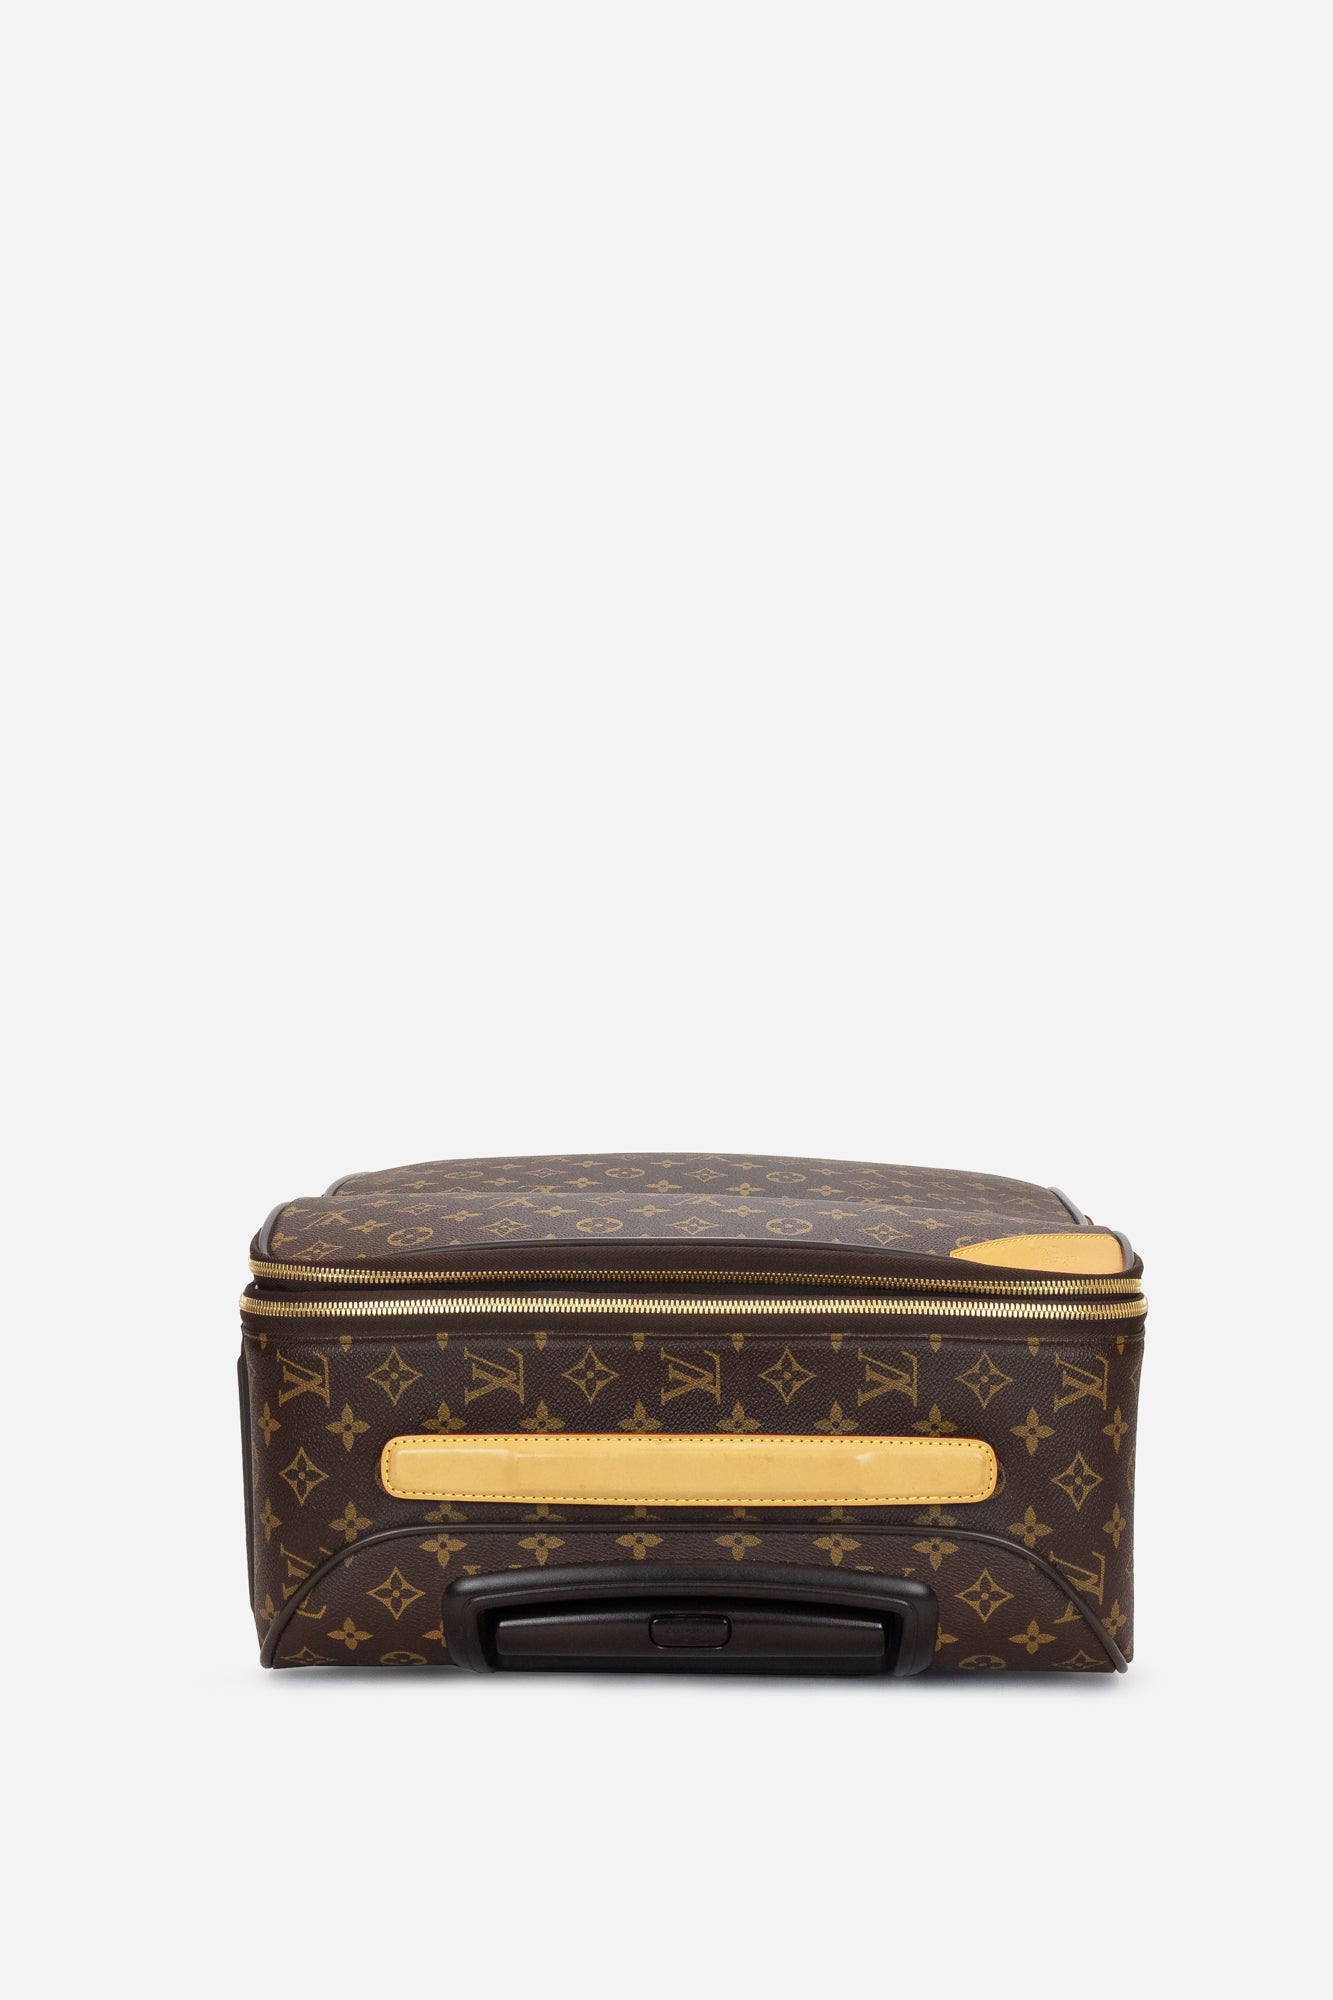 Pégase 55 Business Monogram Luggage with Travel Cover